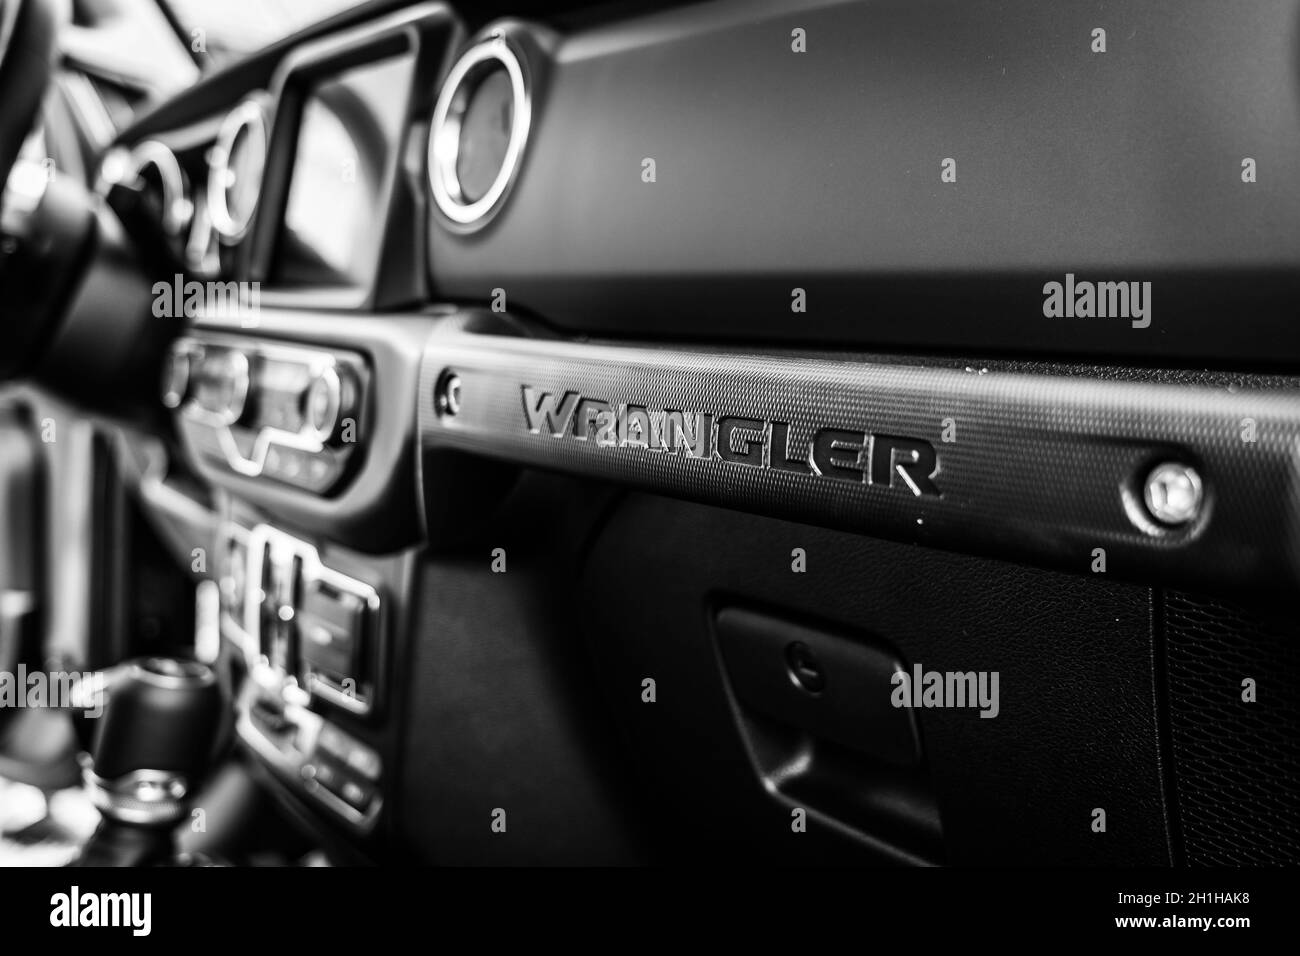 DIEDERSDORF, GERMANY - AUGUST 30, 2020: The interior of mid-size SUV Jeep  Wrangler Unlimited Rubicon, 2020. Black and white. The exhibition of 